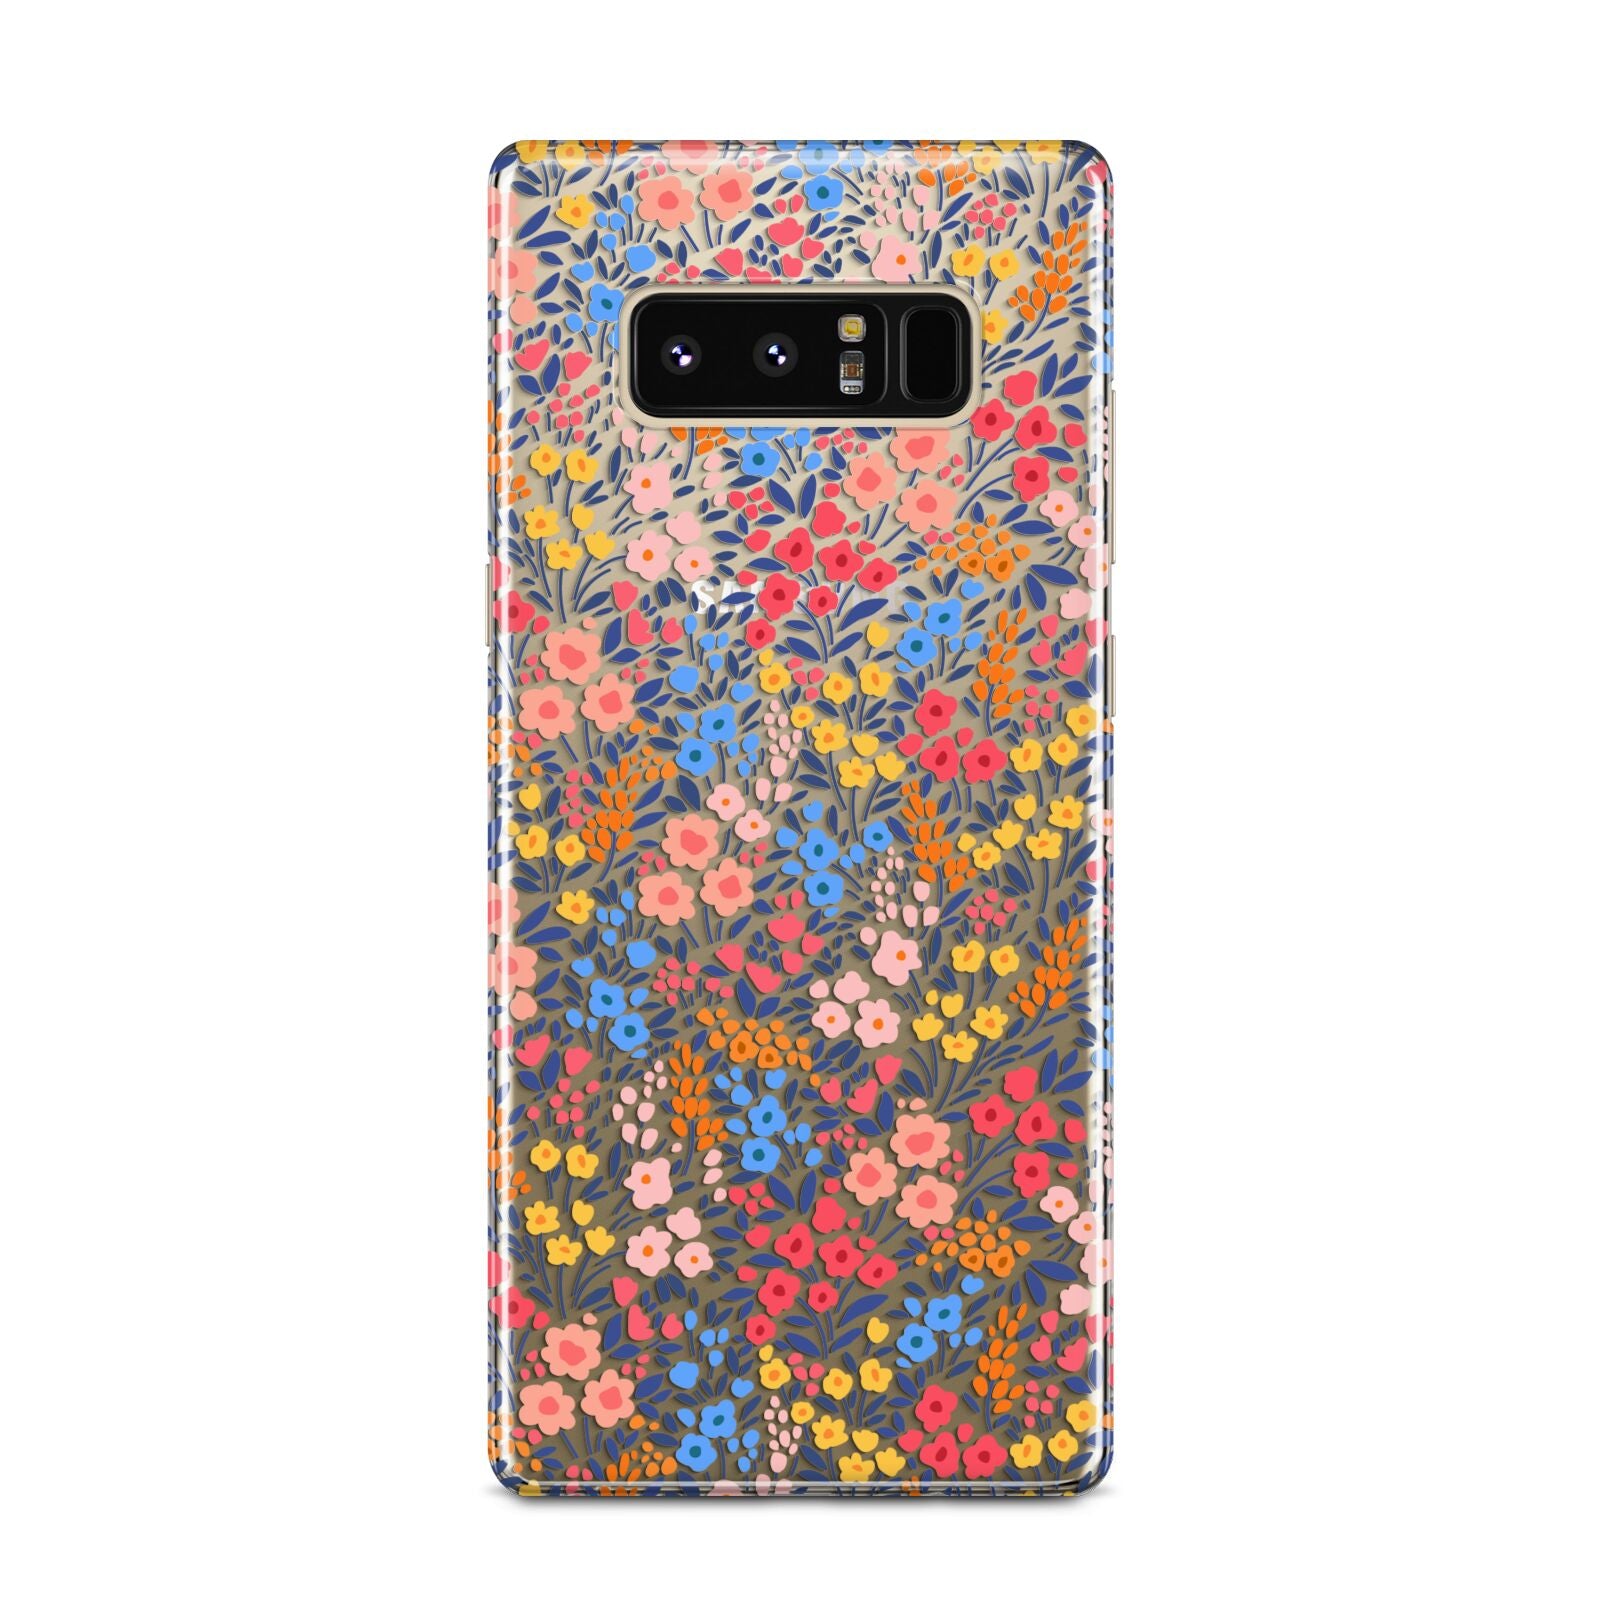 Small Flowers Samsung Galaxy Note 8 Case